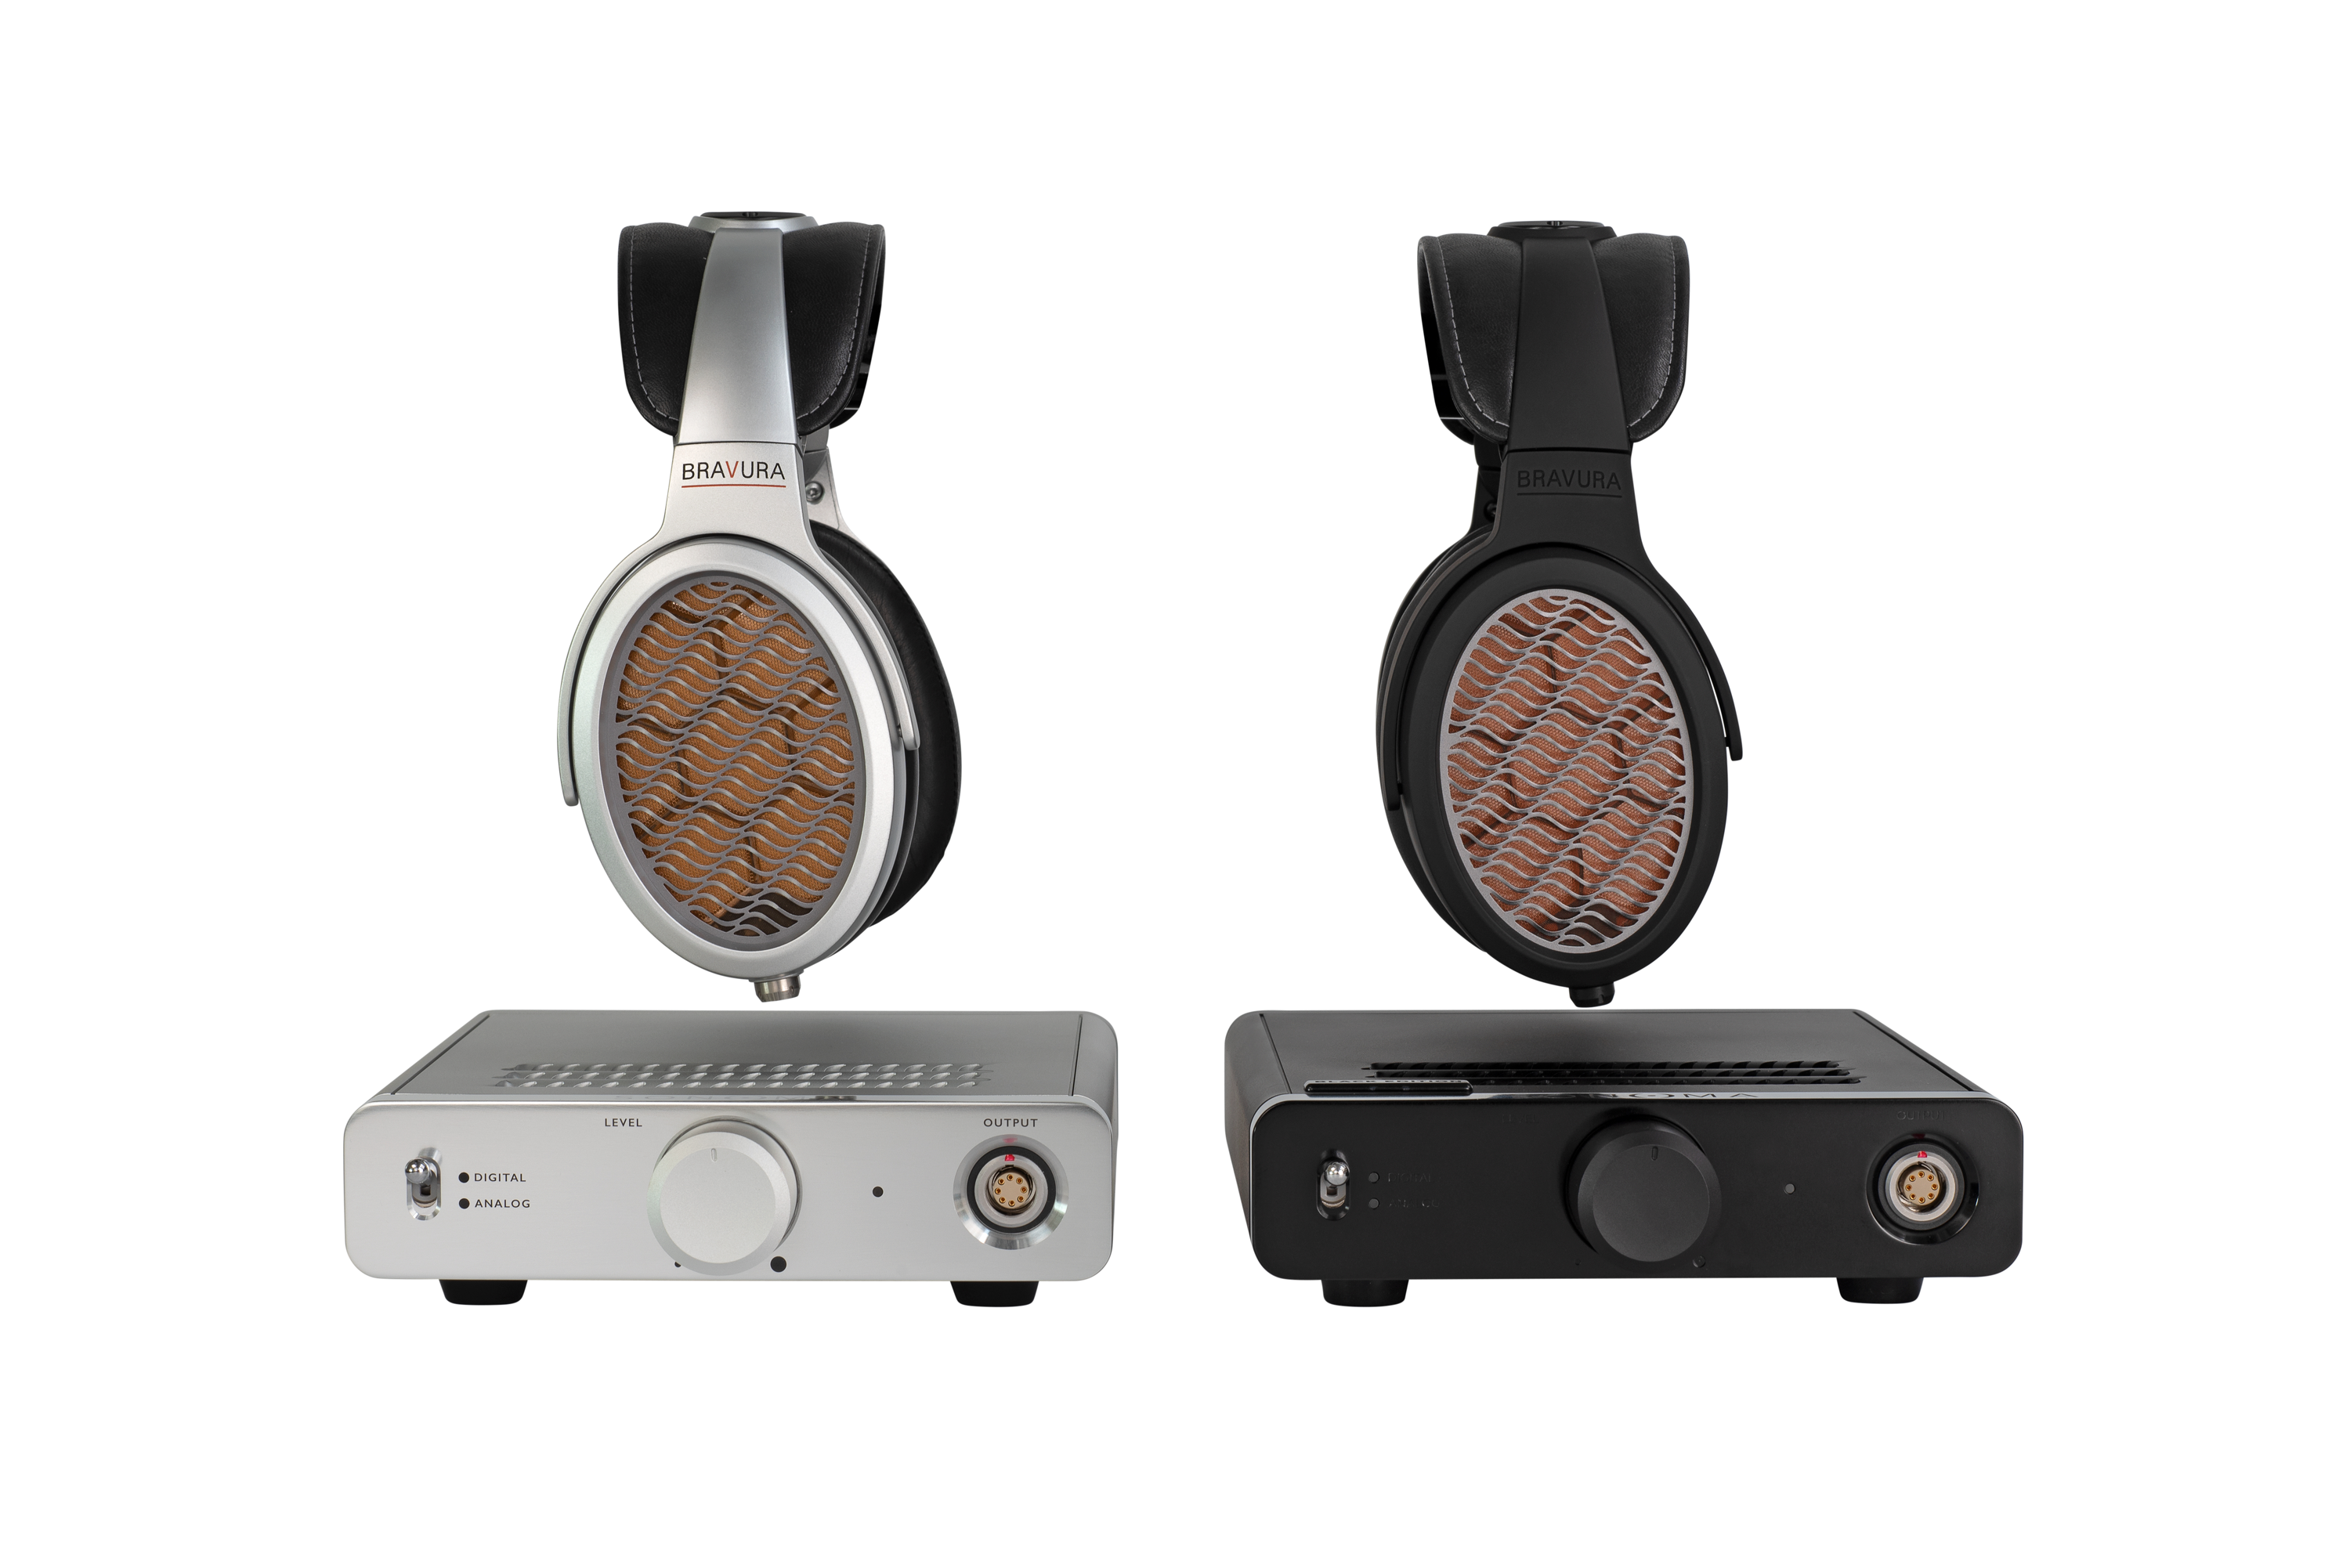 Bravura headphones and Sonoma M1 amplifier in silver and black